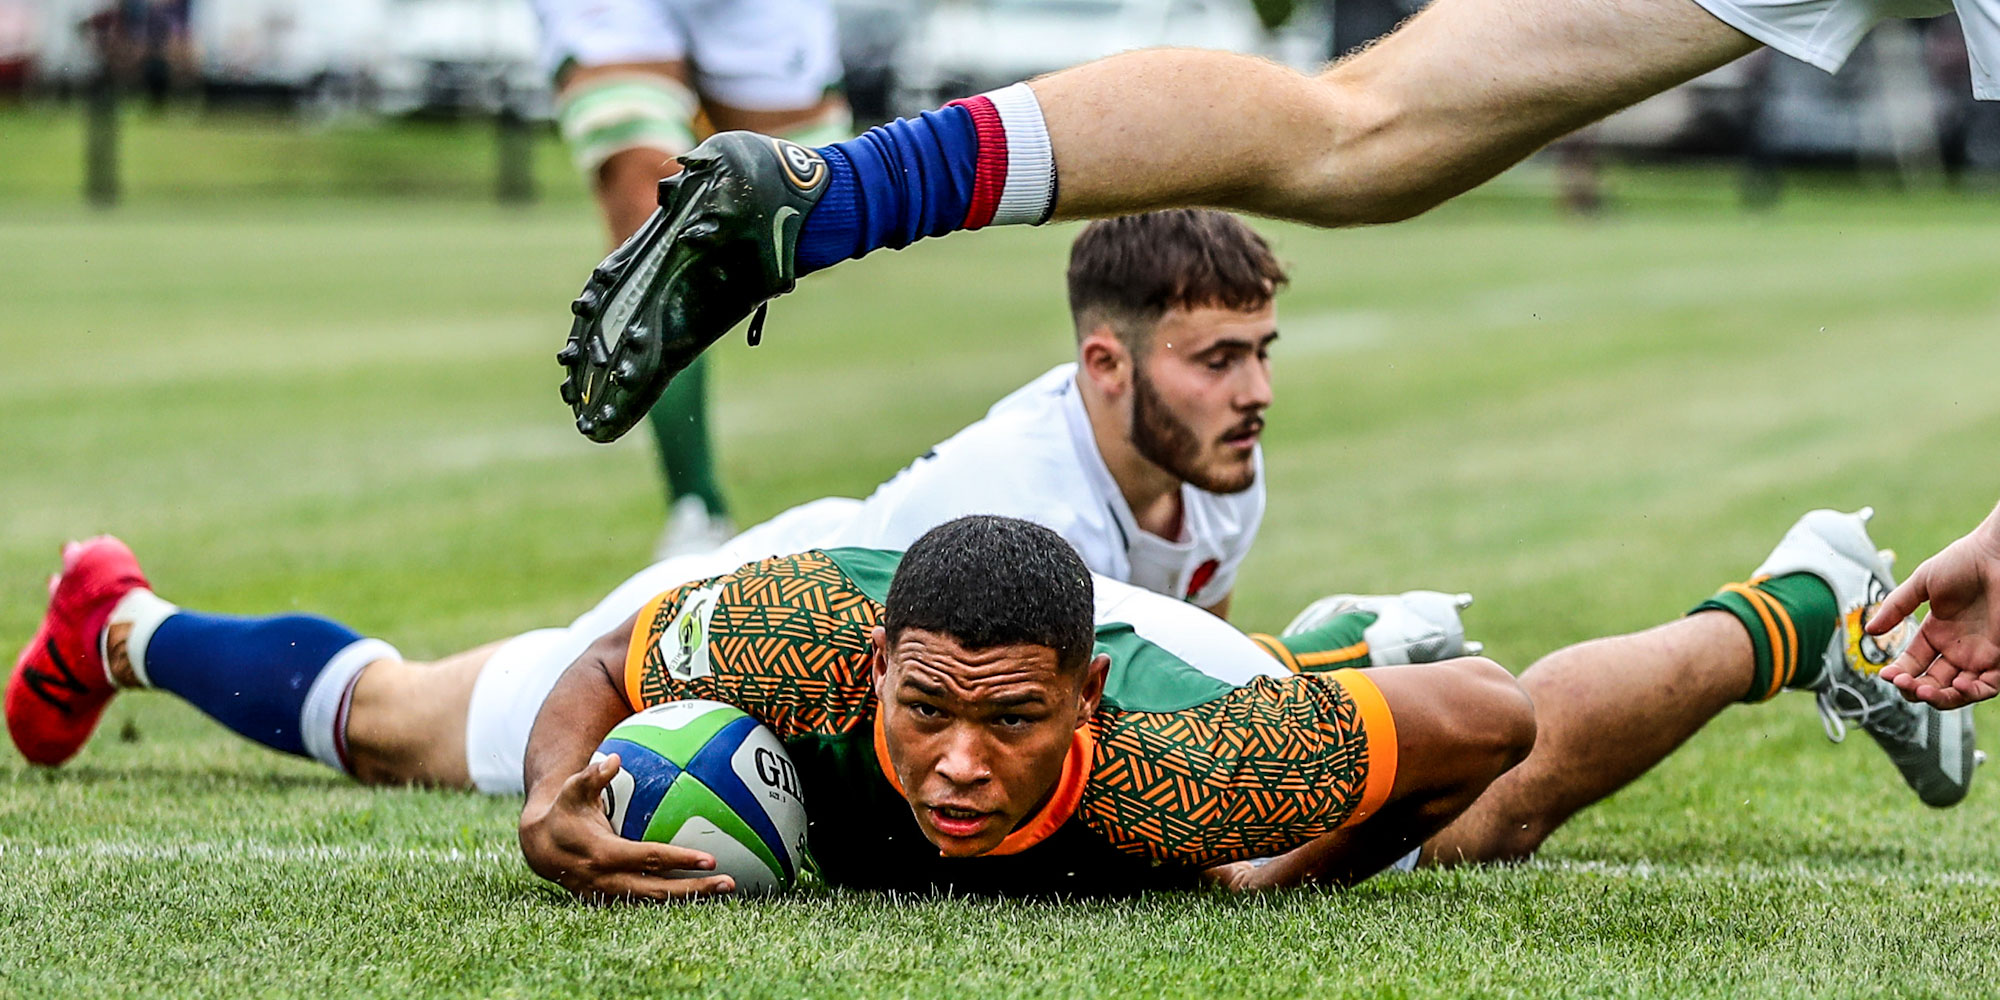 Suleiman Hartzenberg scored a crucial early try in the clash against England.